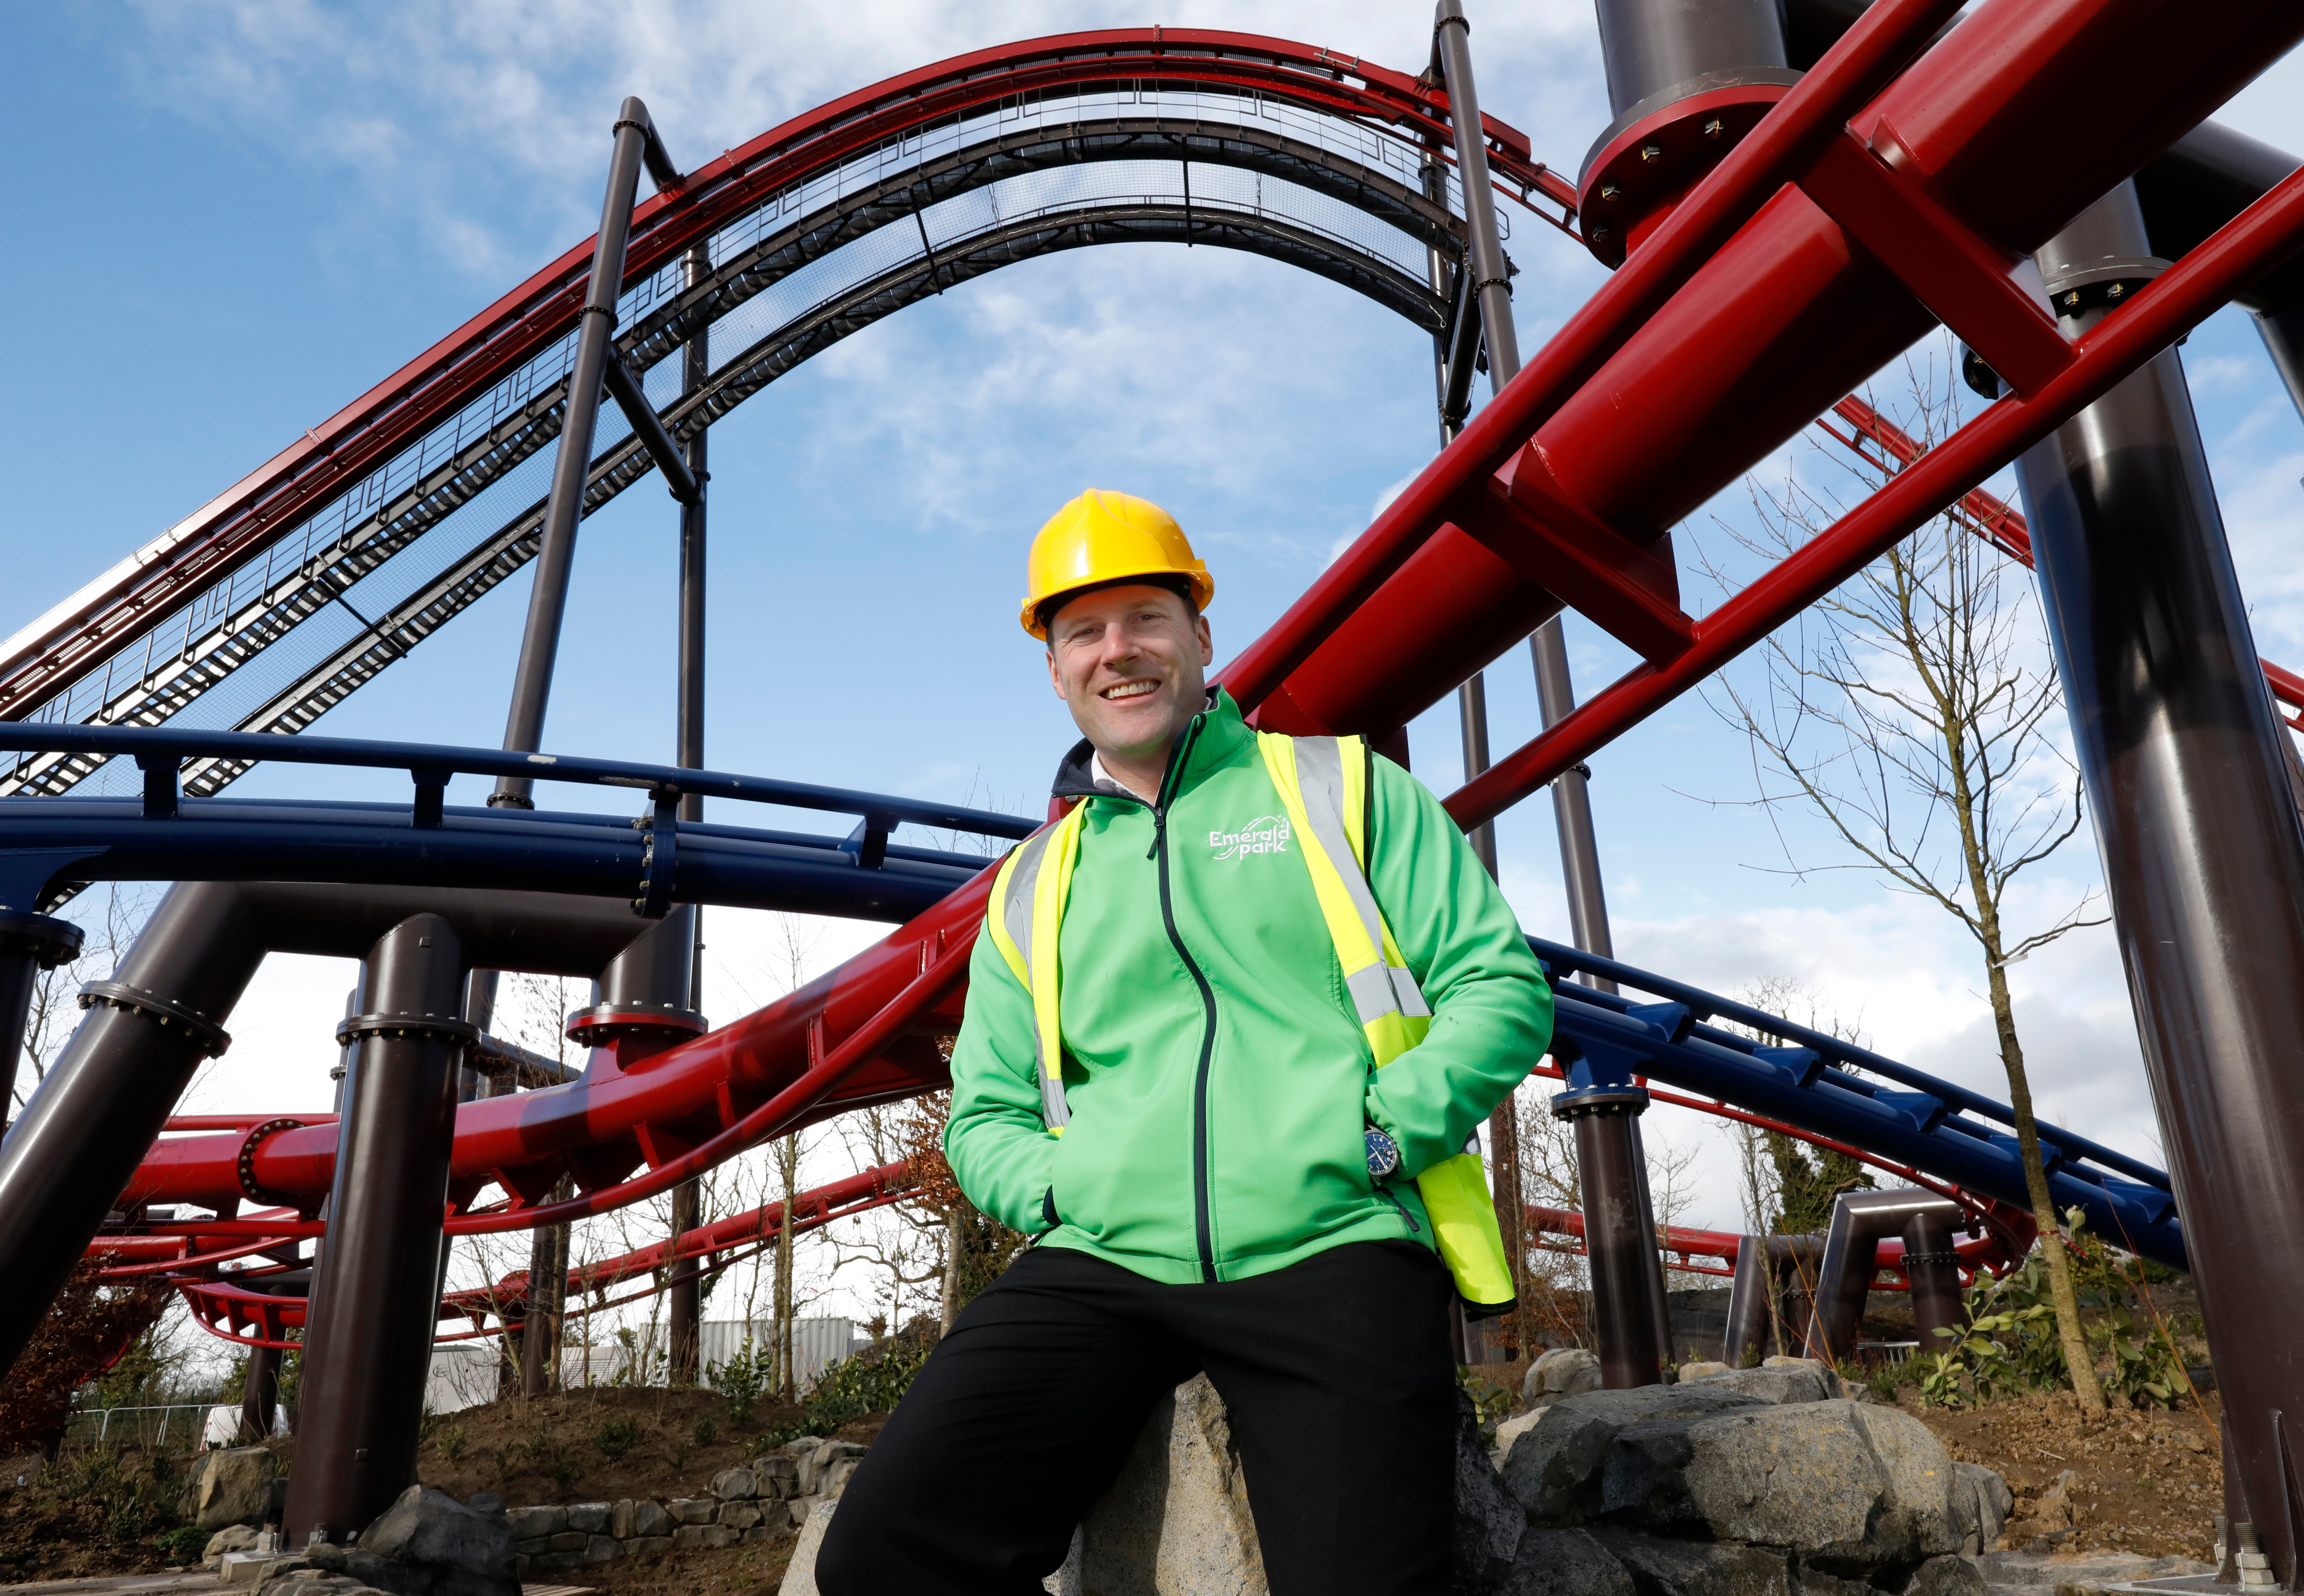 a man wearing a hard hat and an Emerald Park jacket on a boulder with two rollercoasters in the back